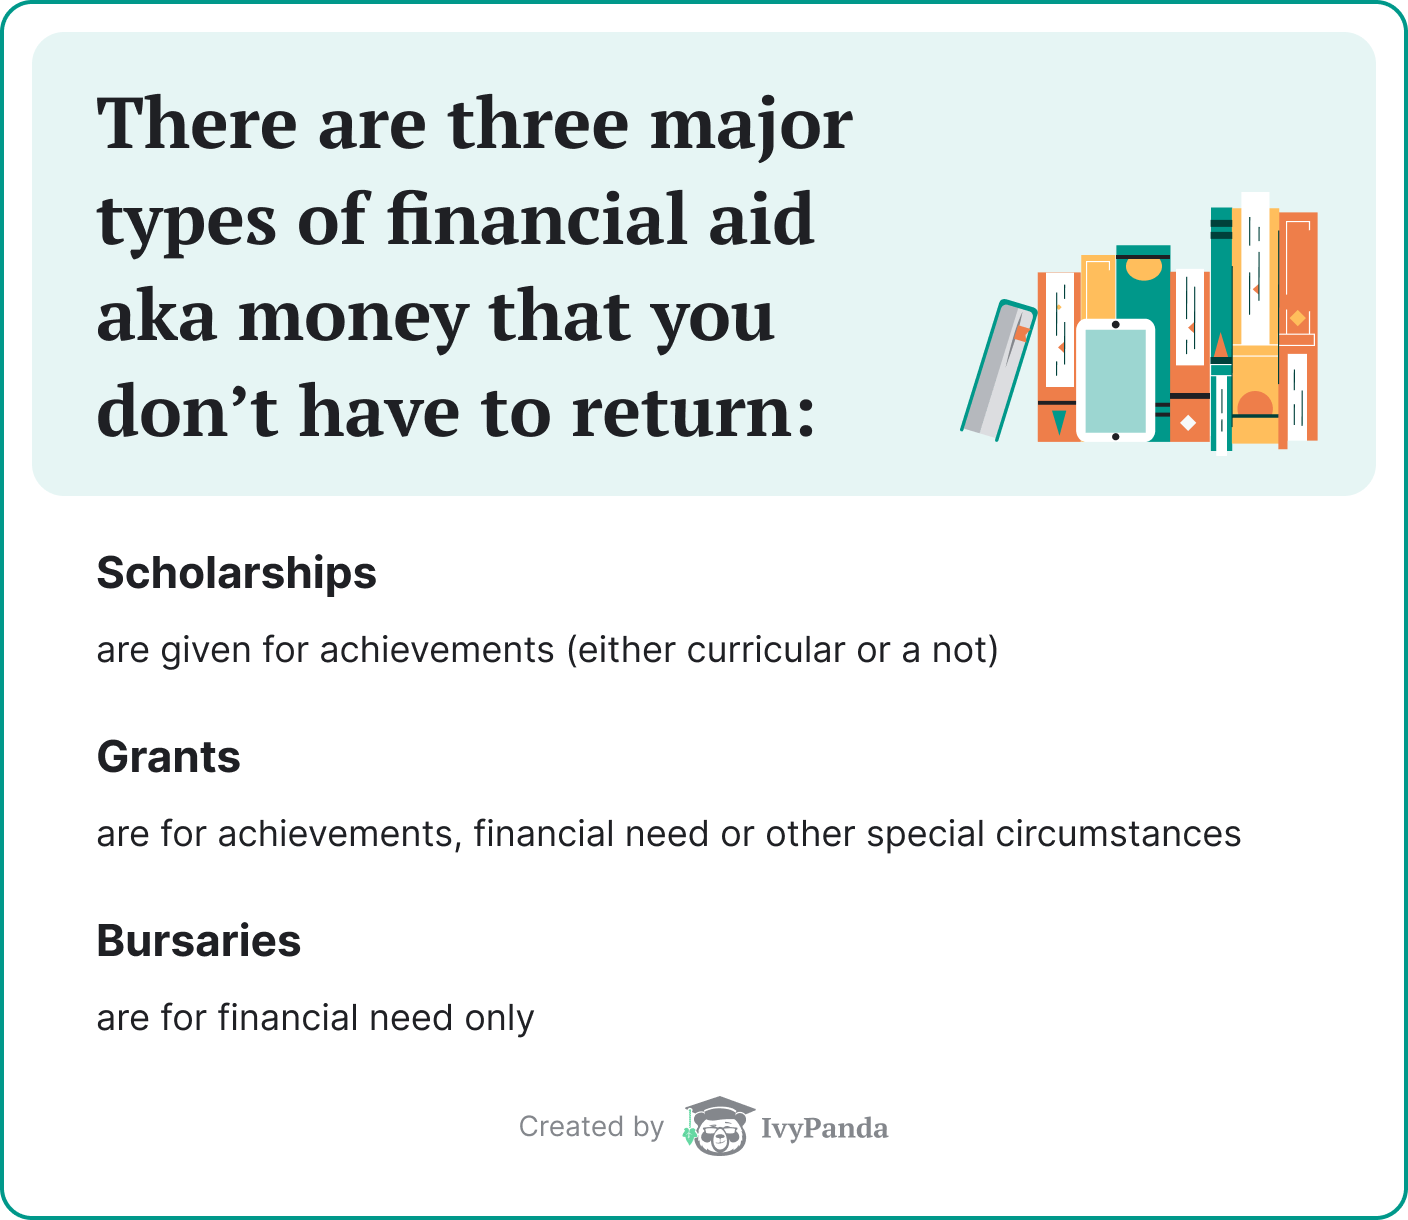 There are three major types of financial aid.